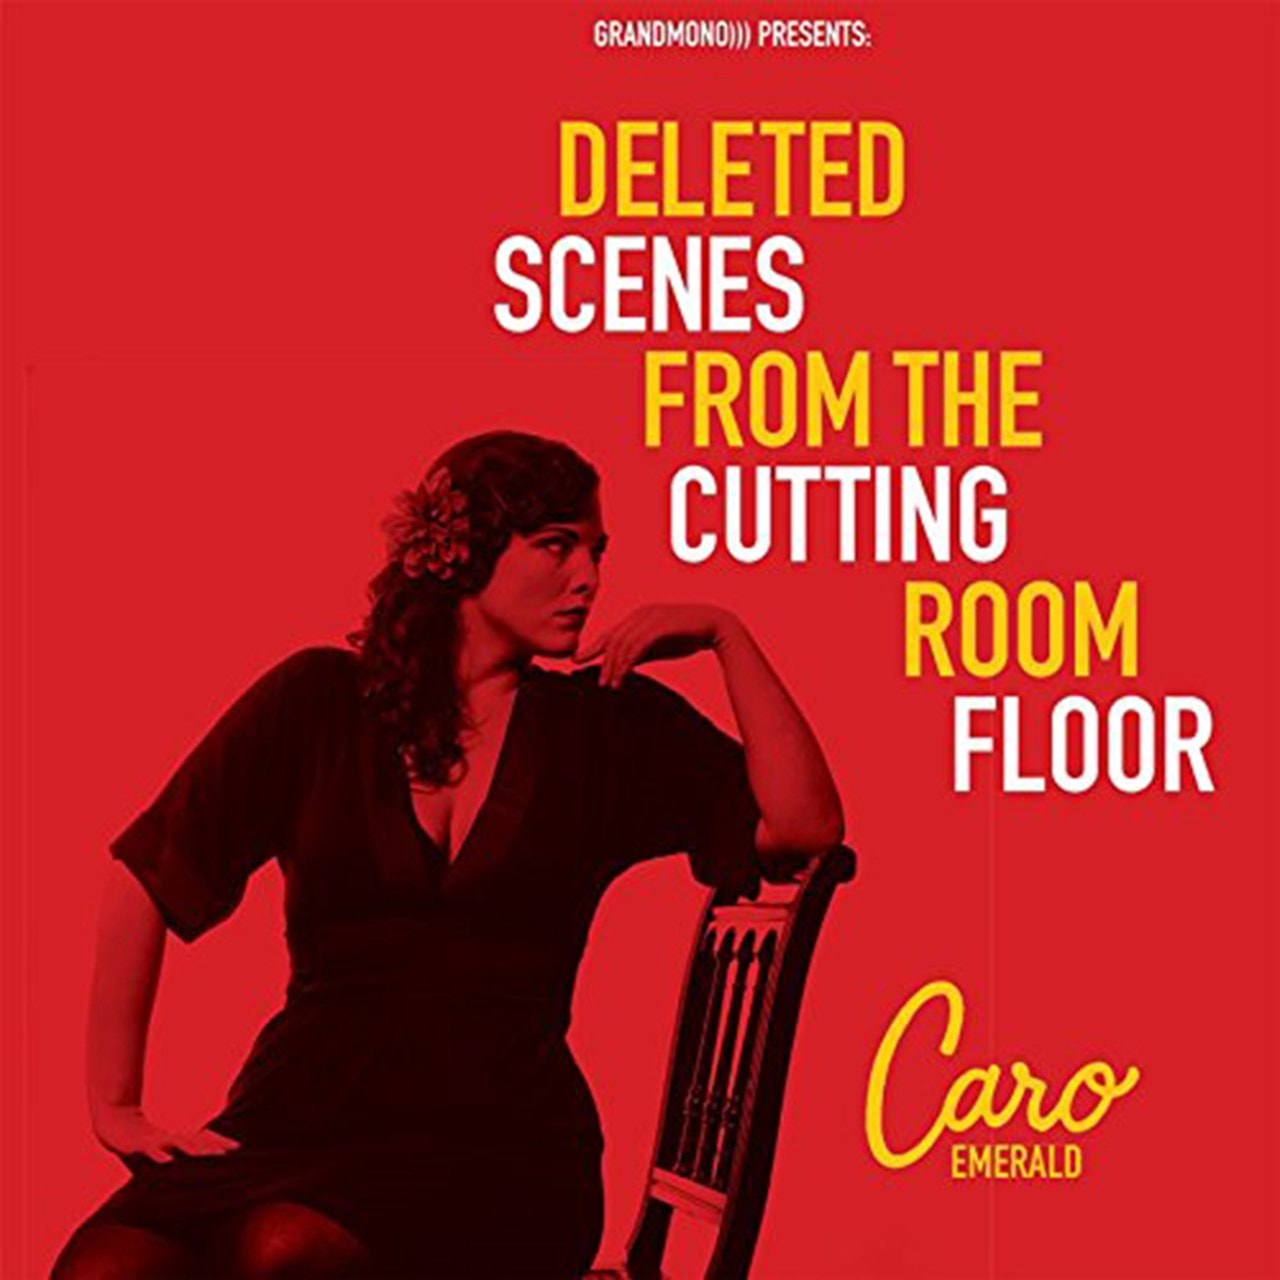 Deleted Scenes From The Cutting Room Floor Cd Album Free Shipping Over £20 Hmv Store 1821